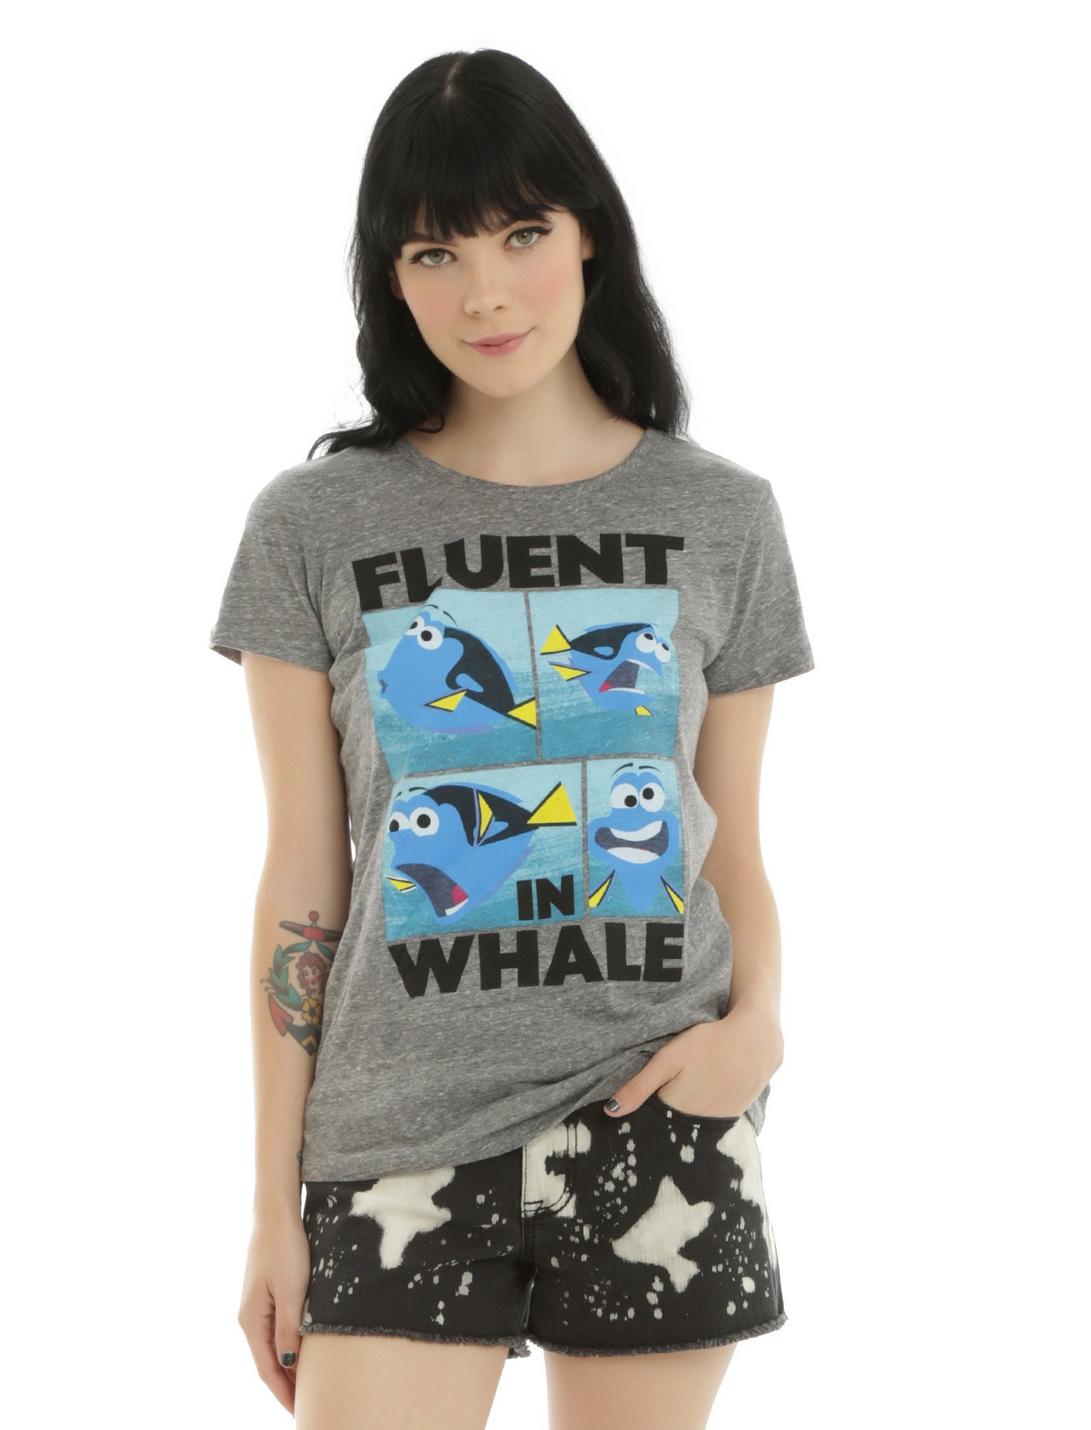 Disney Finding Dory Fluent In Whale Girls T-Shirt, GREY, hi-res